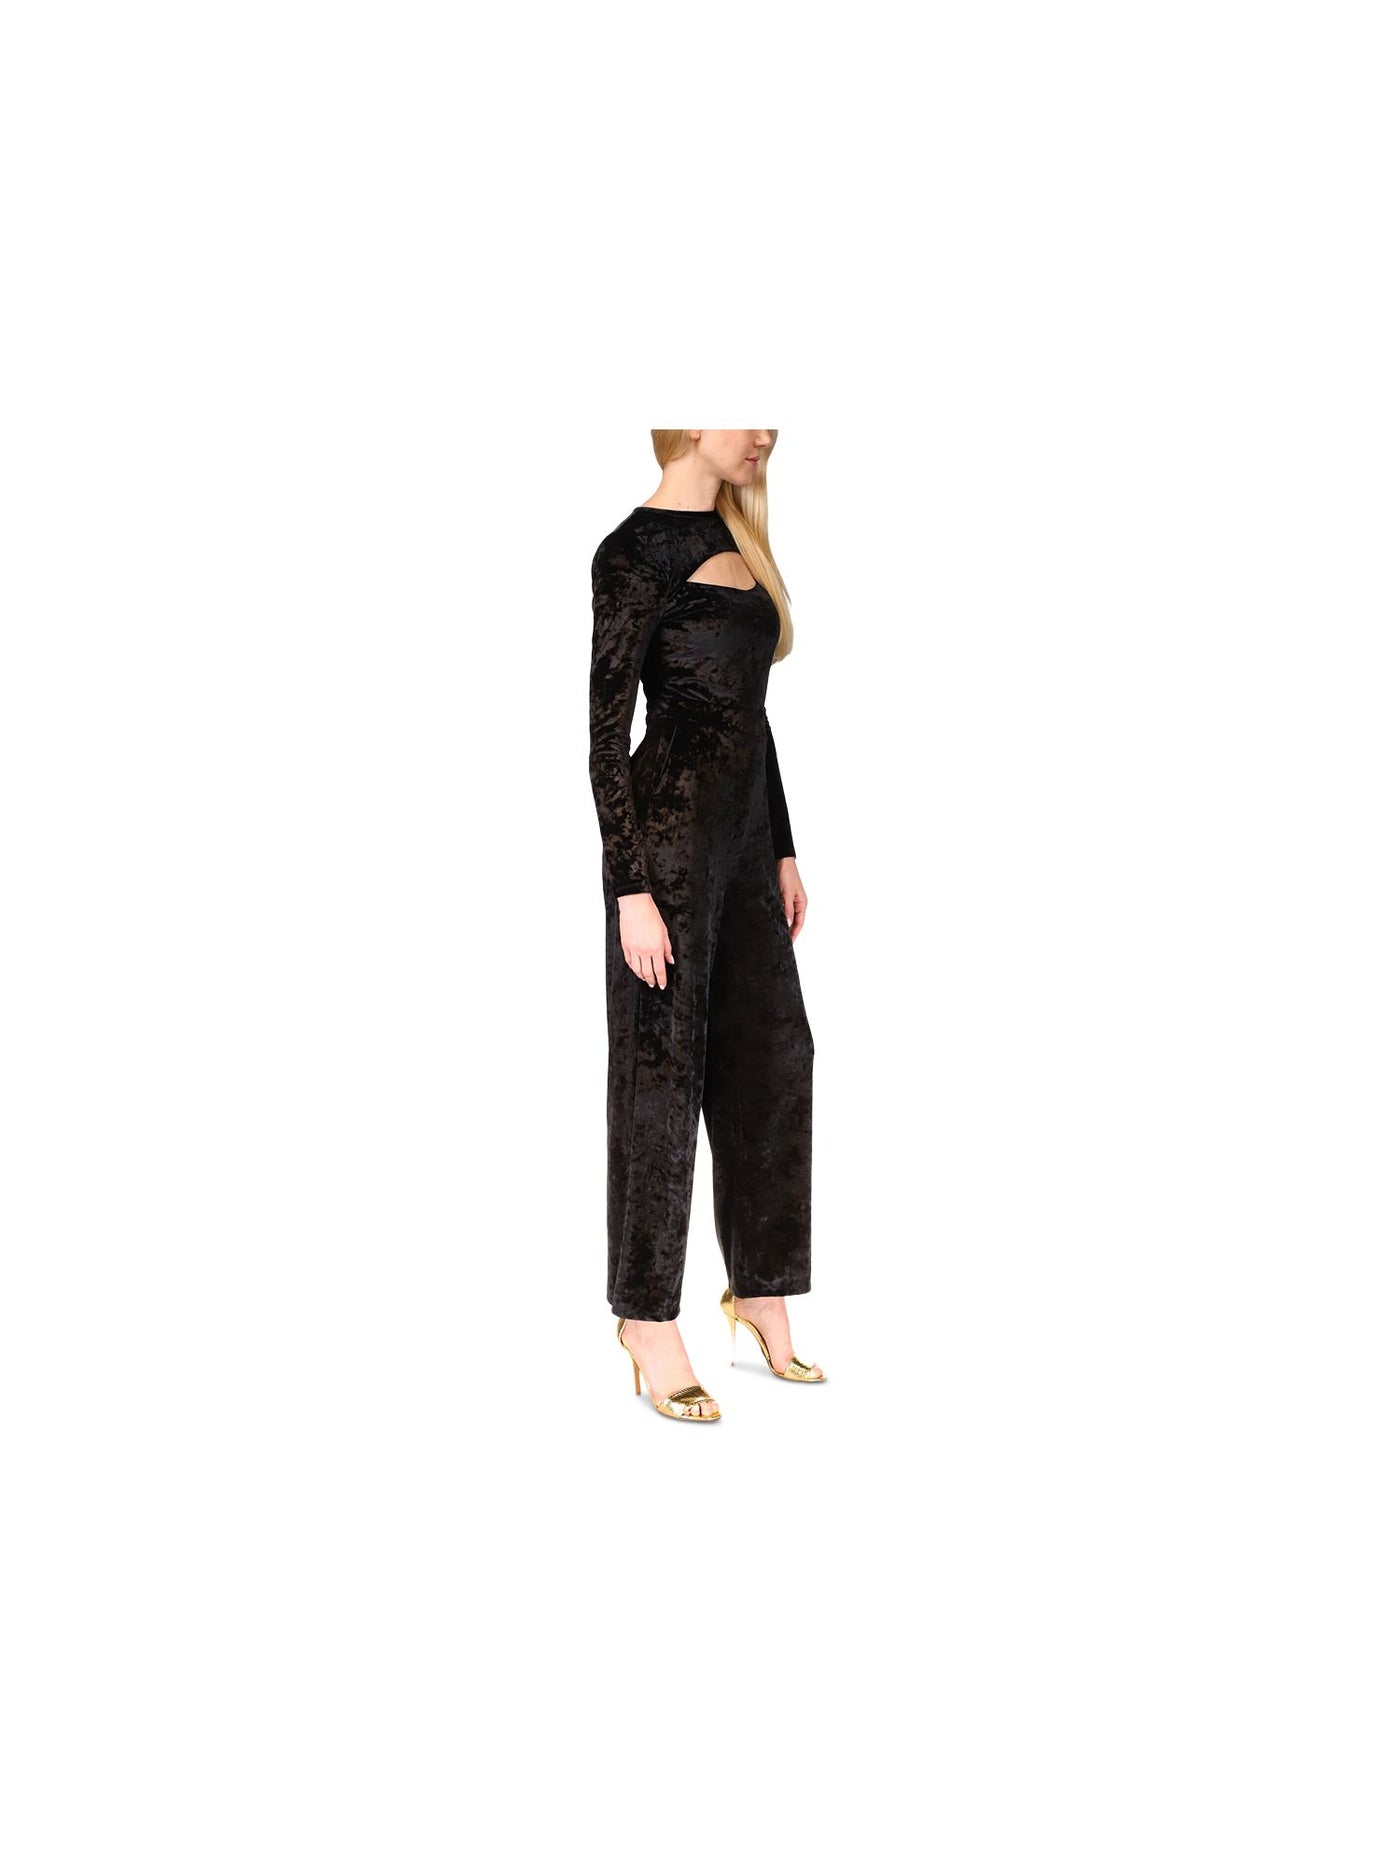 MICHAEL MICHAEL KORS Womens Black Cut Out Zippered Pocketed Ankle Long Sleeve Crew Neck High Waist Jumpsuit Petites P\M